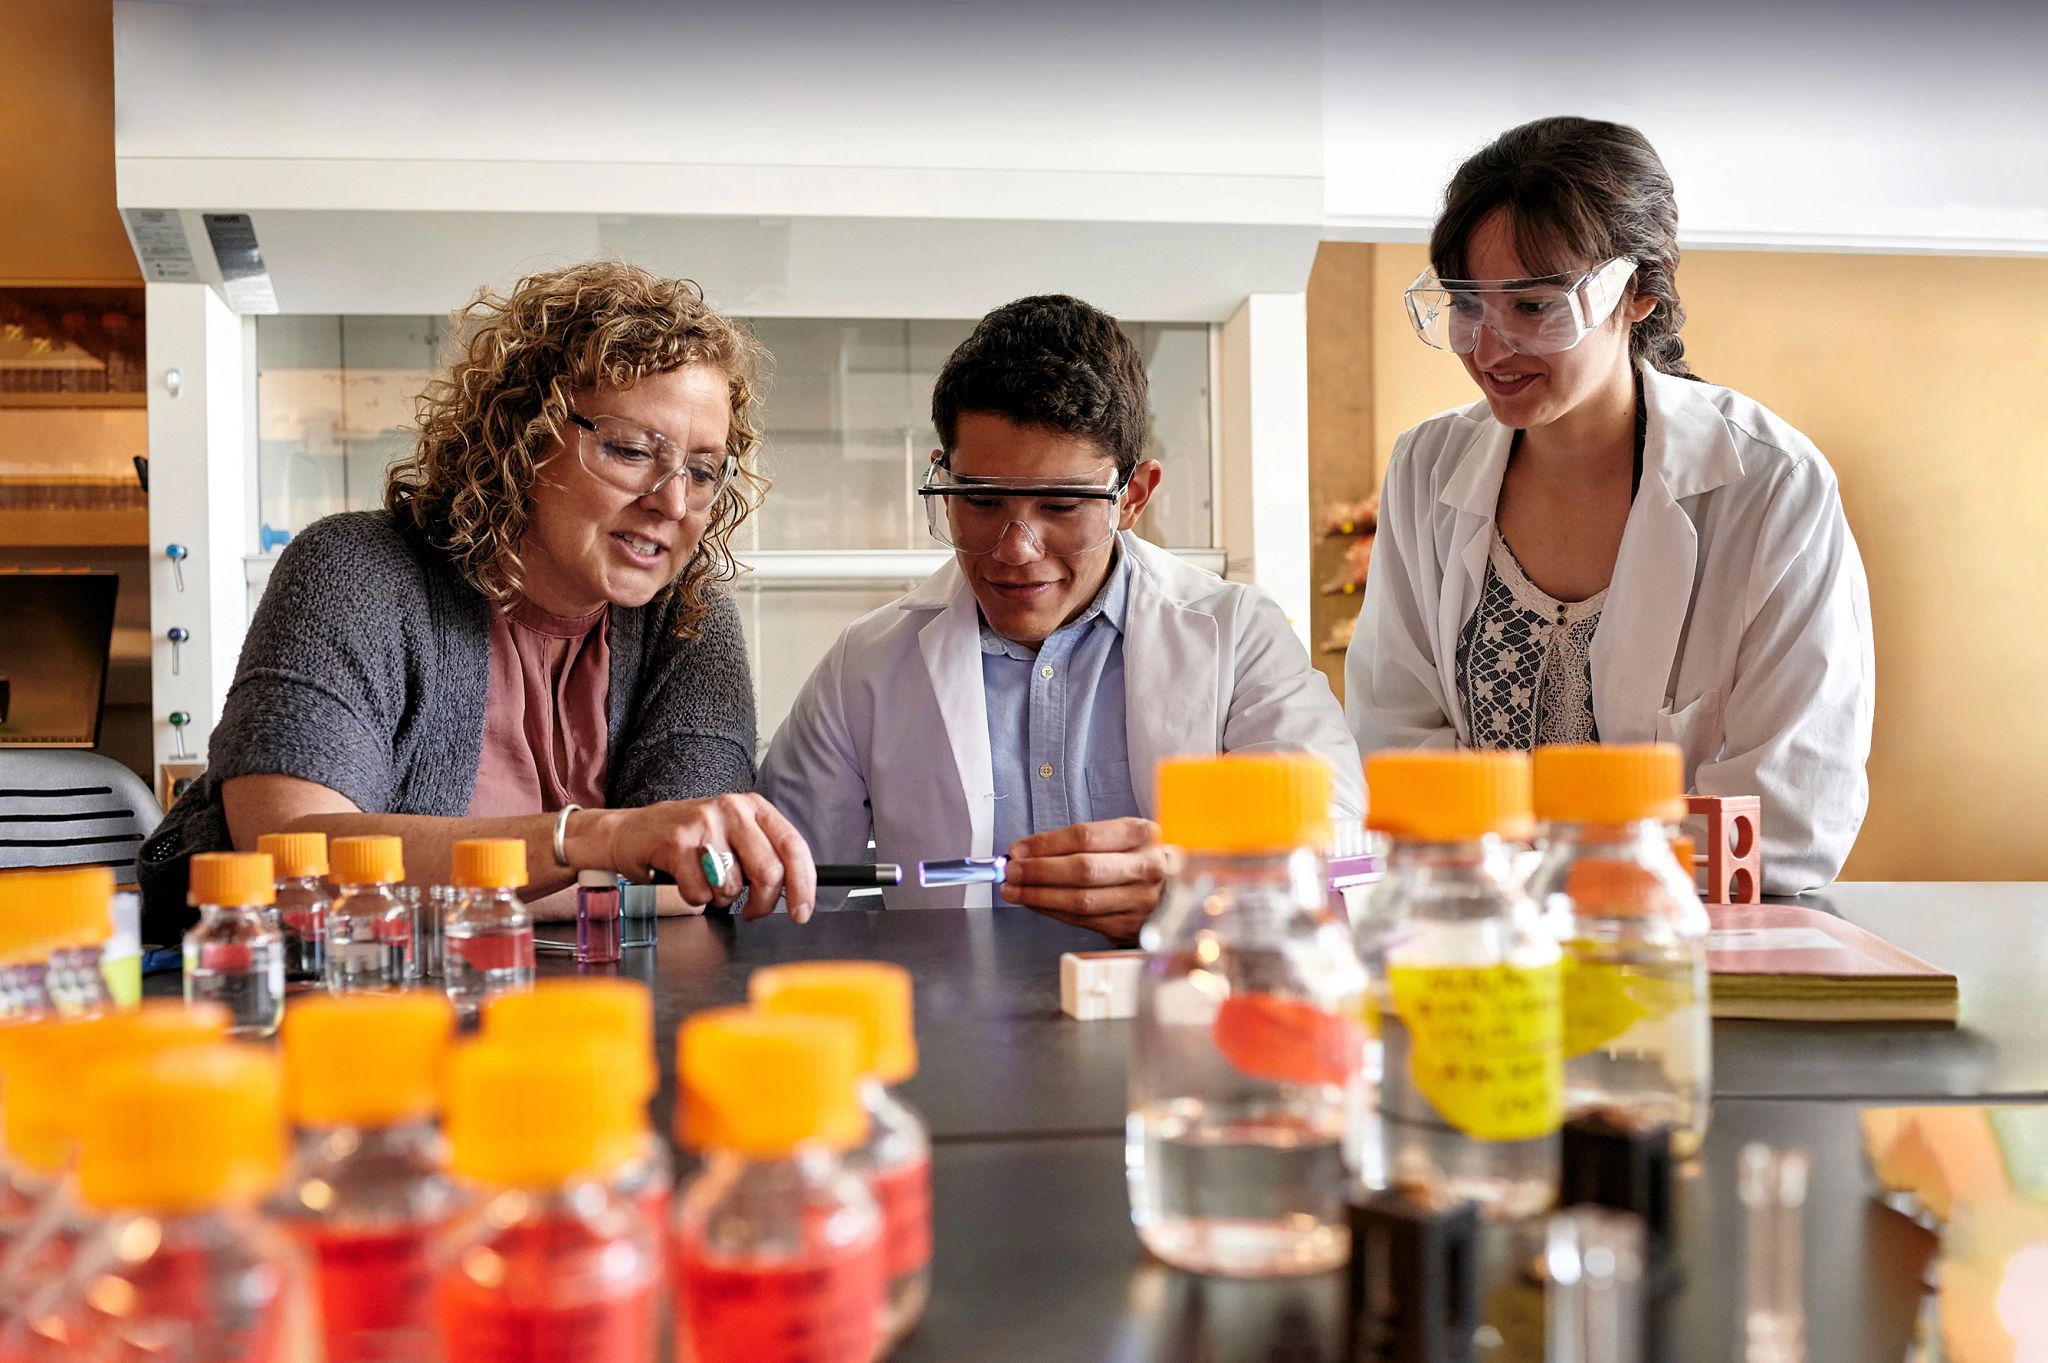 Jennifer Martinez, PhD, Professor and Director, Center for Materials Interfaces in Research and Applications, working with NAU students in a lab.